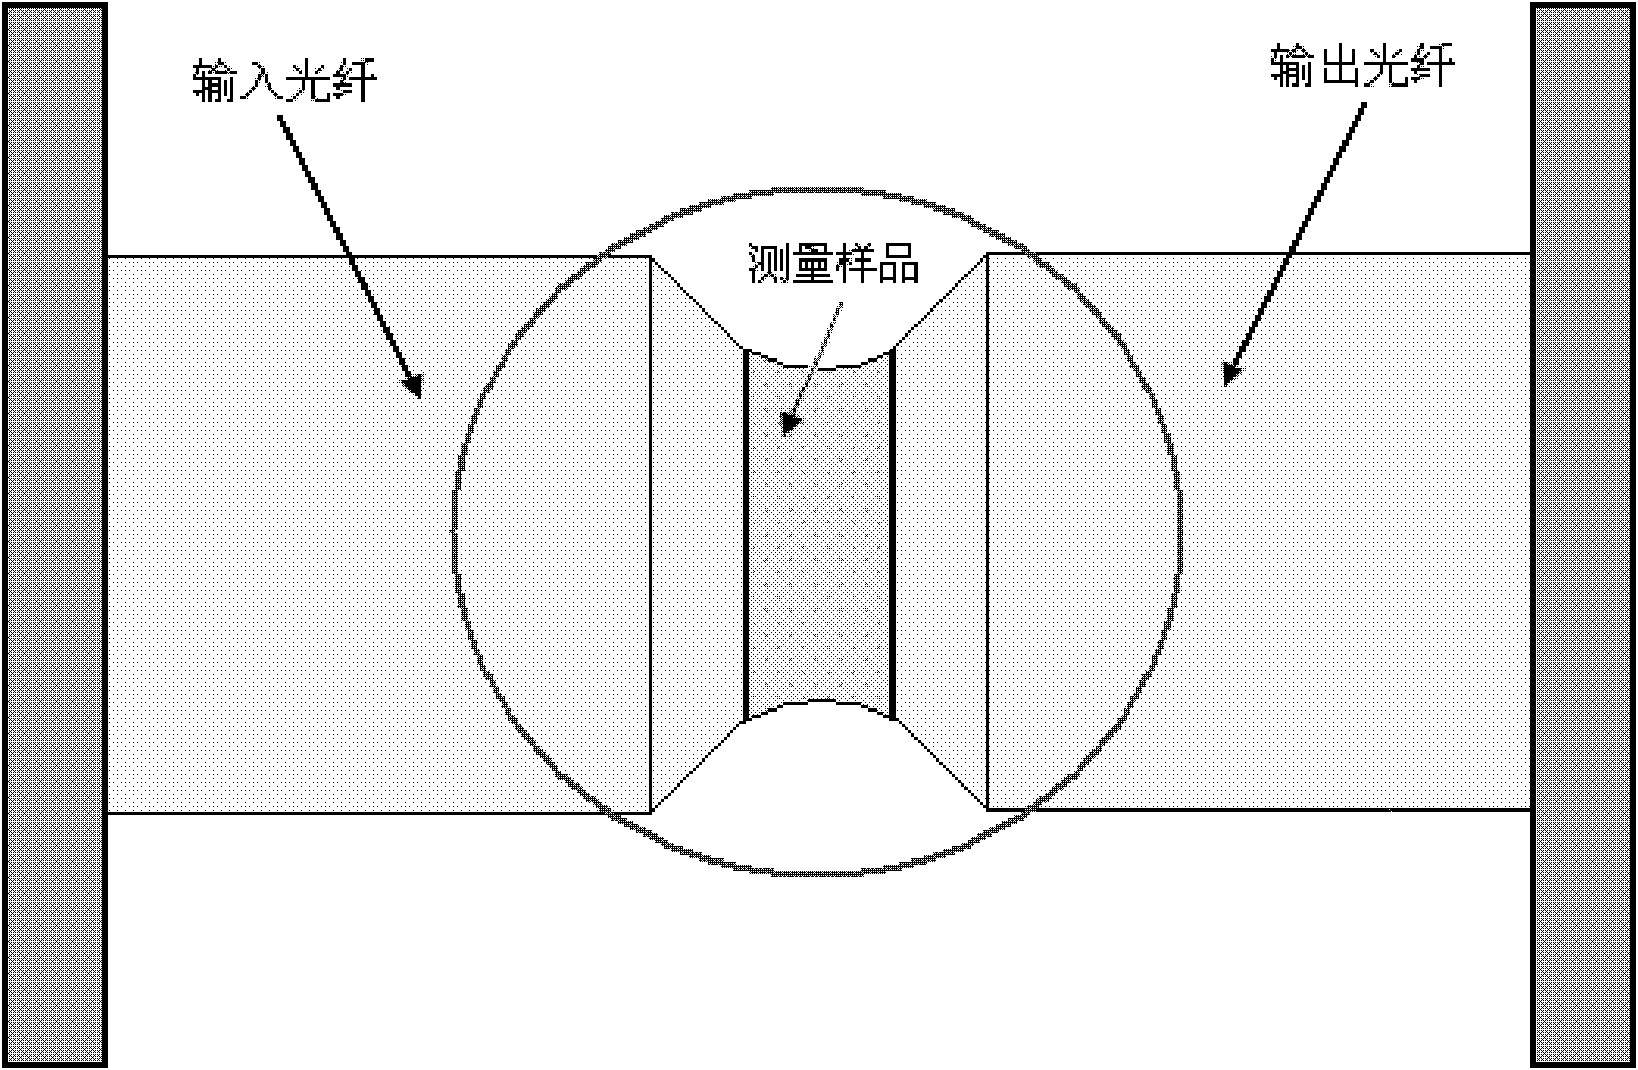 Particle measurement device and method based on fiber coupling